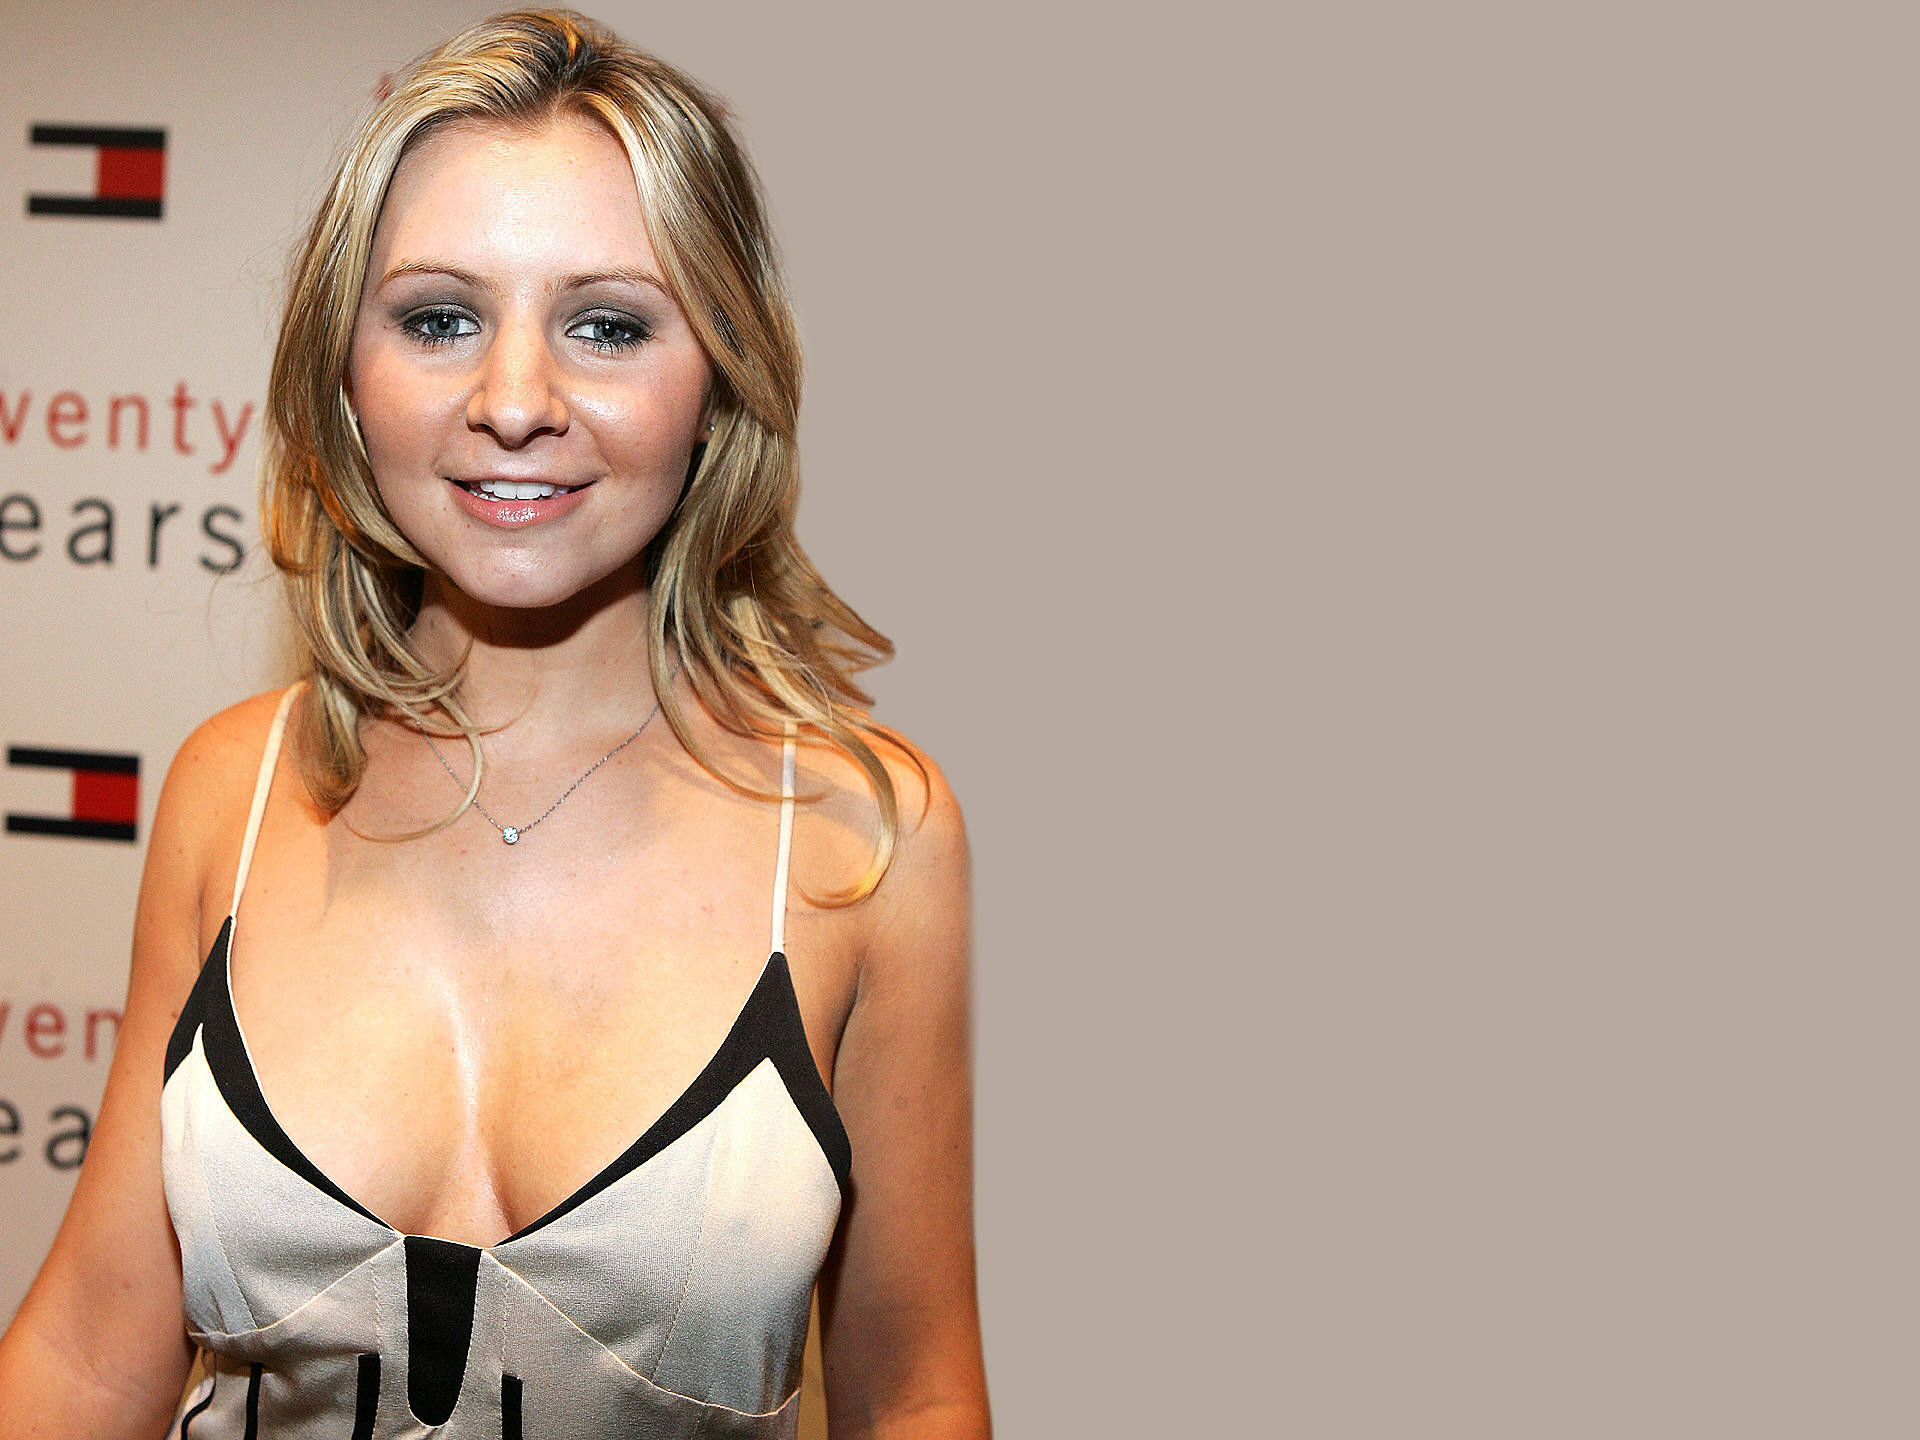 Pictures Of Beverley Mitchell Pictures Of Celebrities